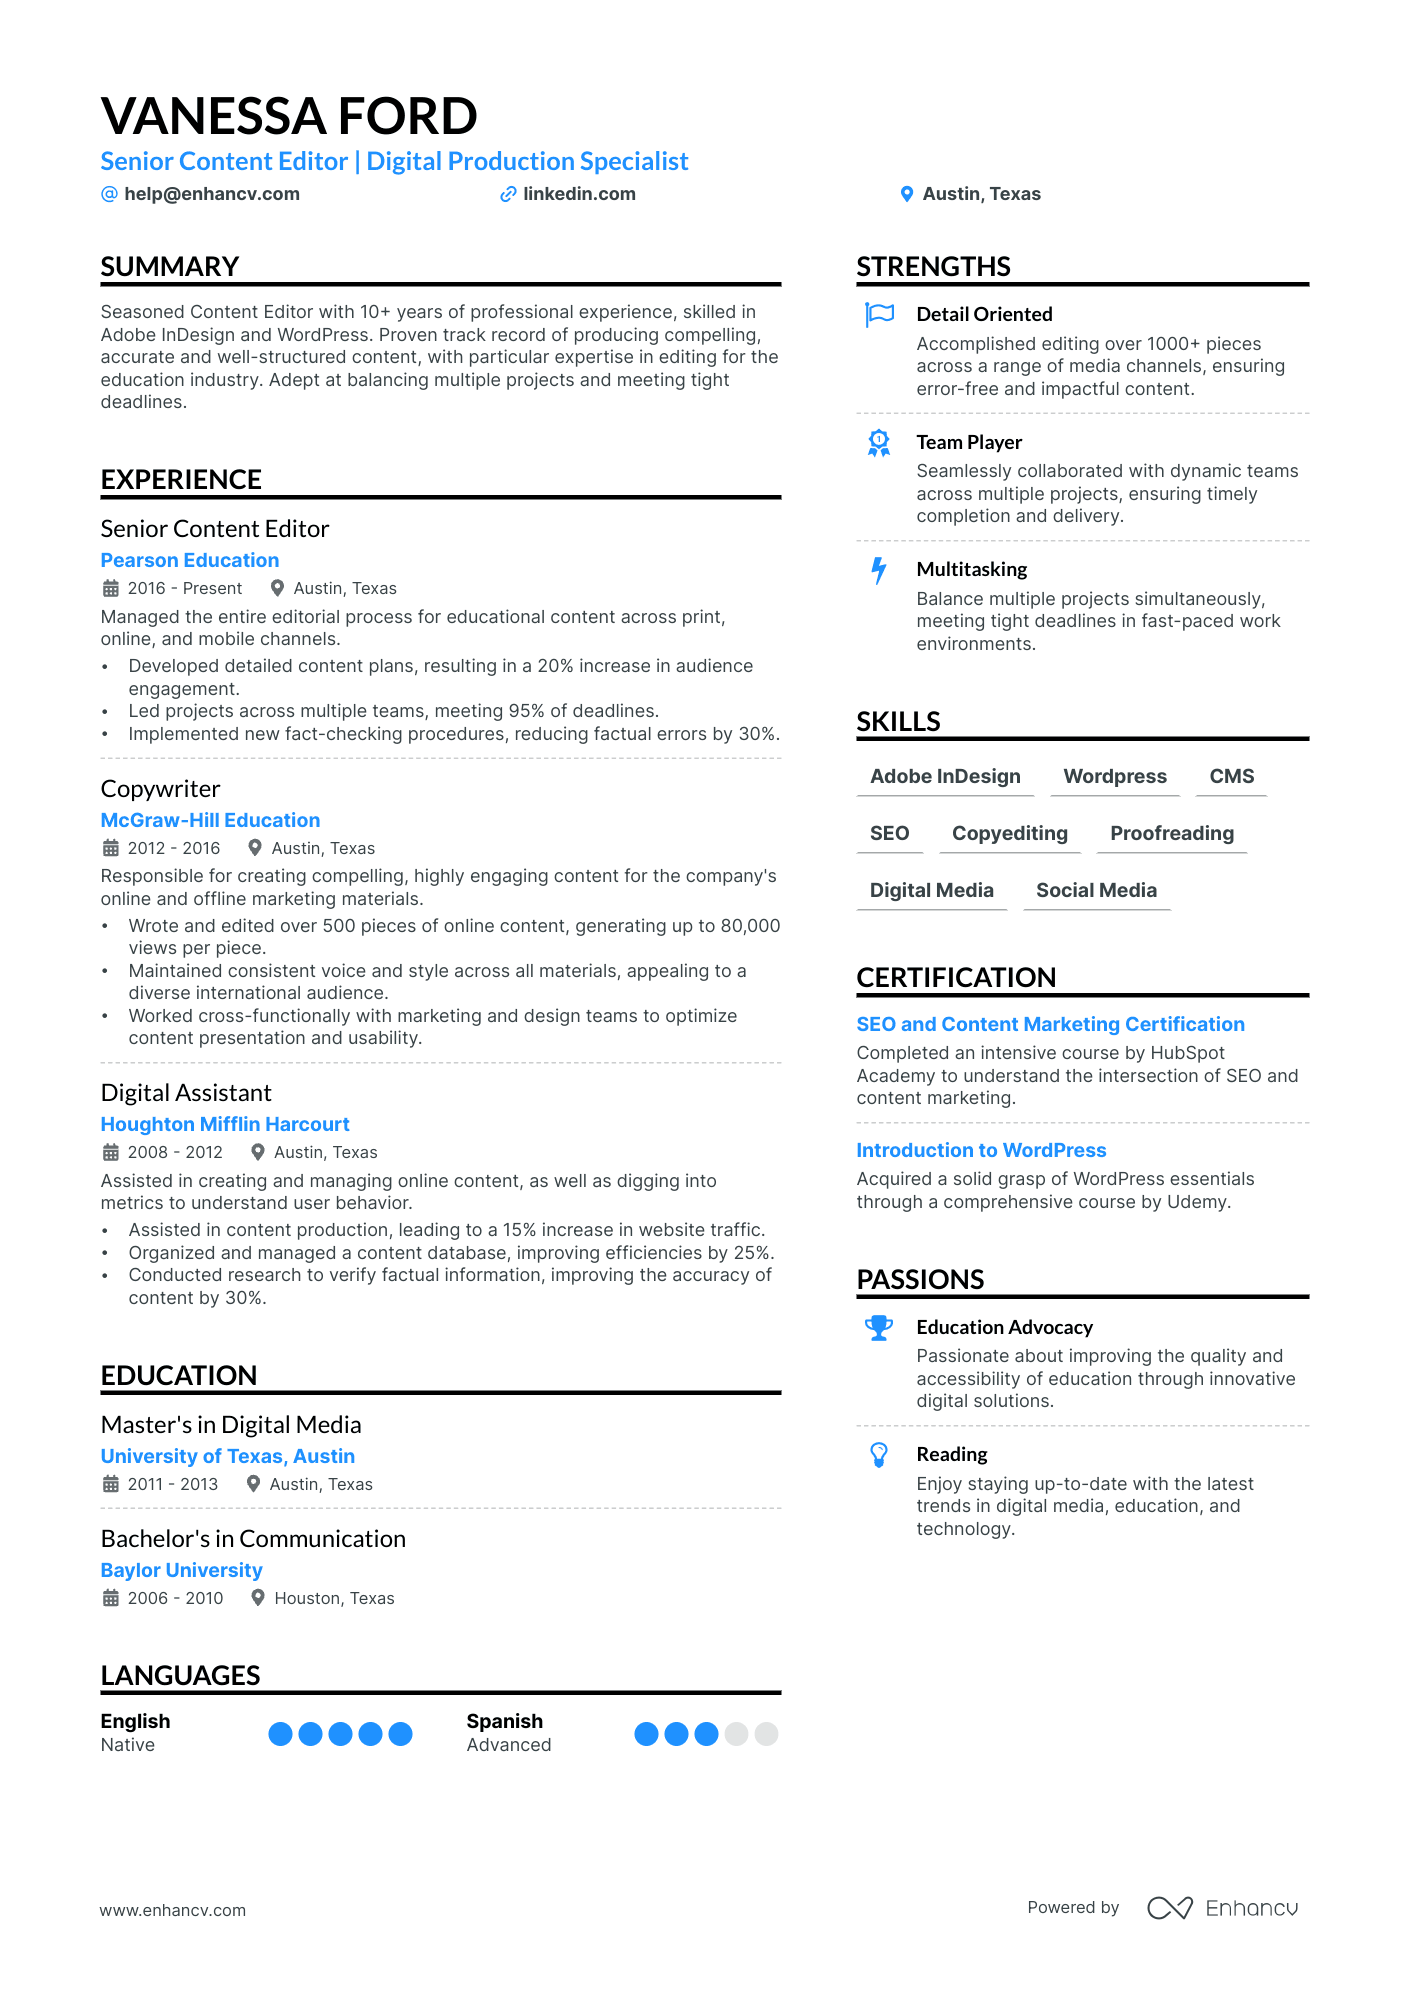 Content Editor resume example